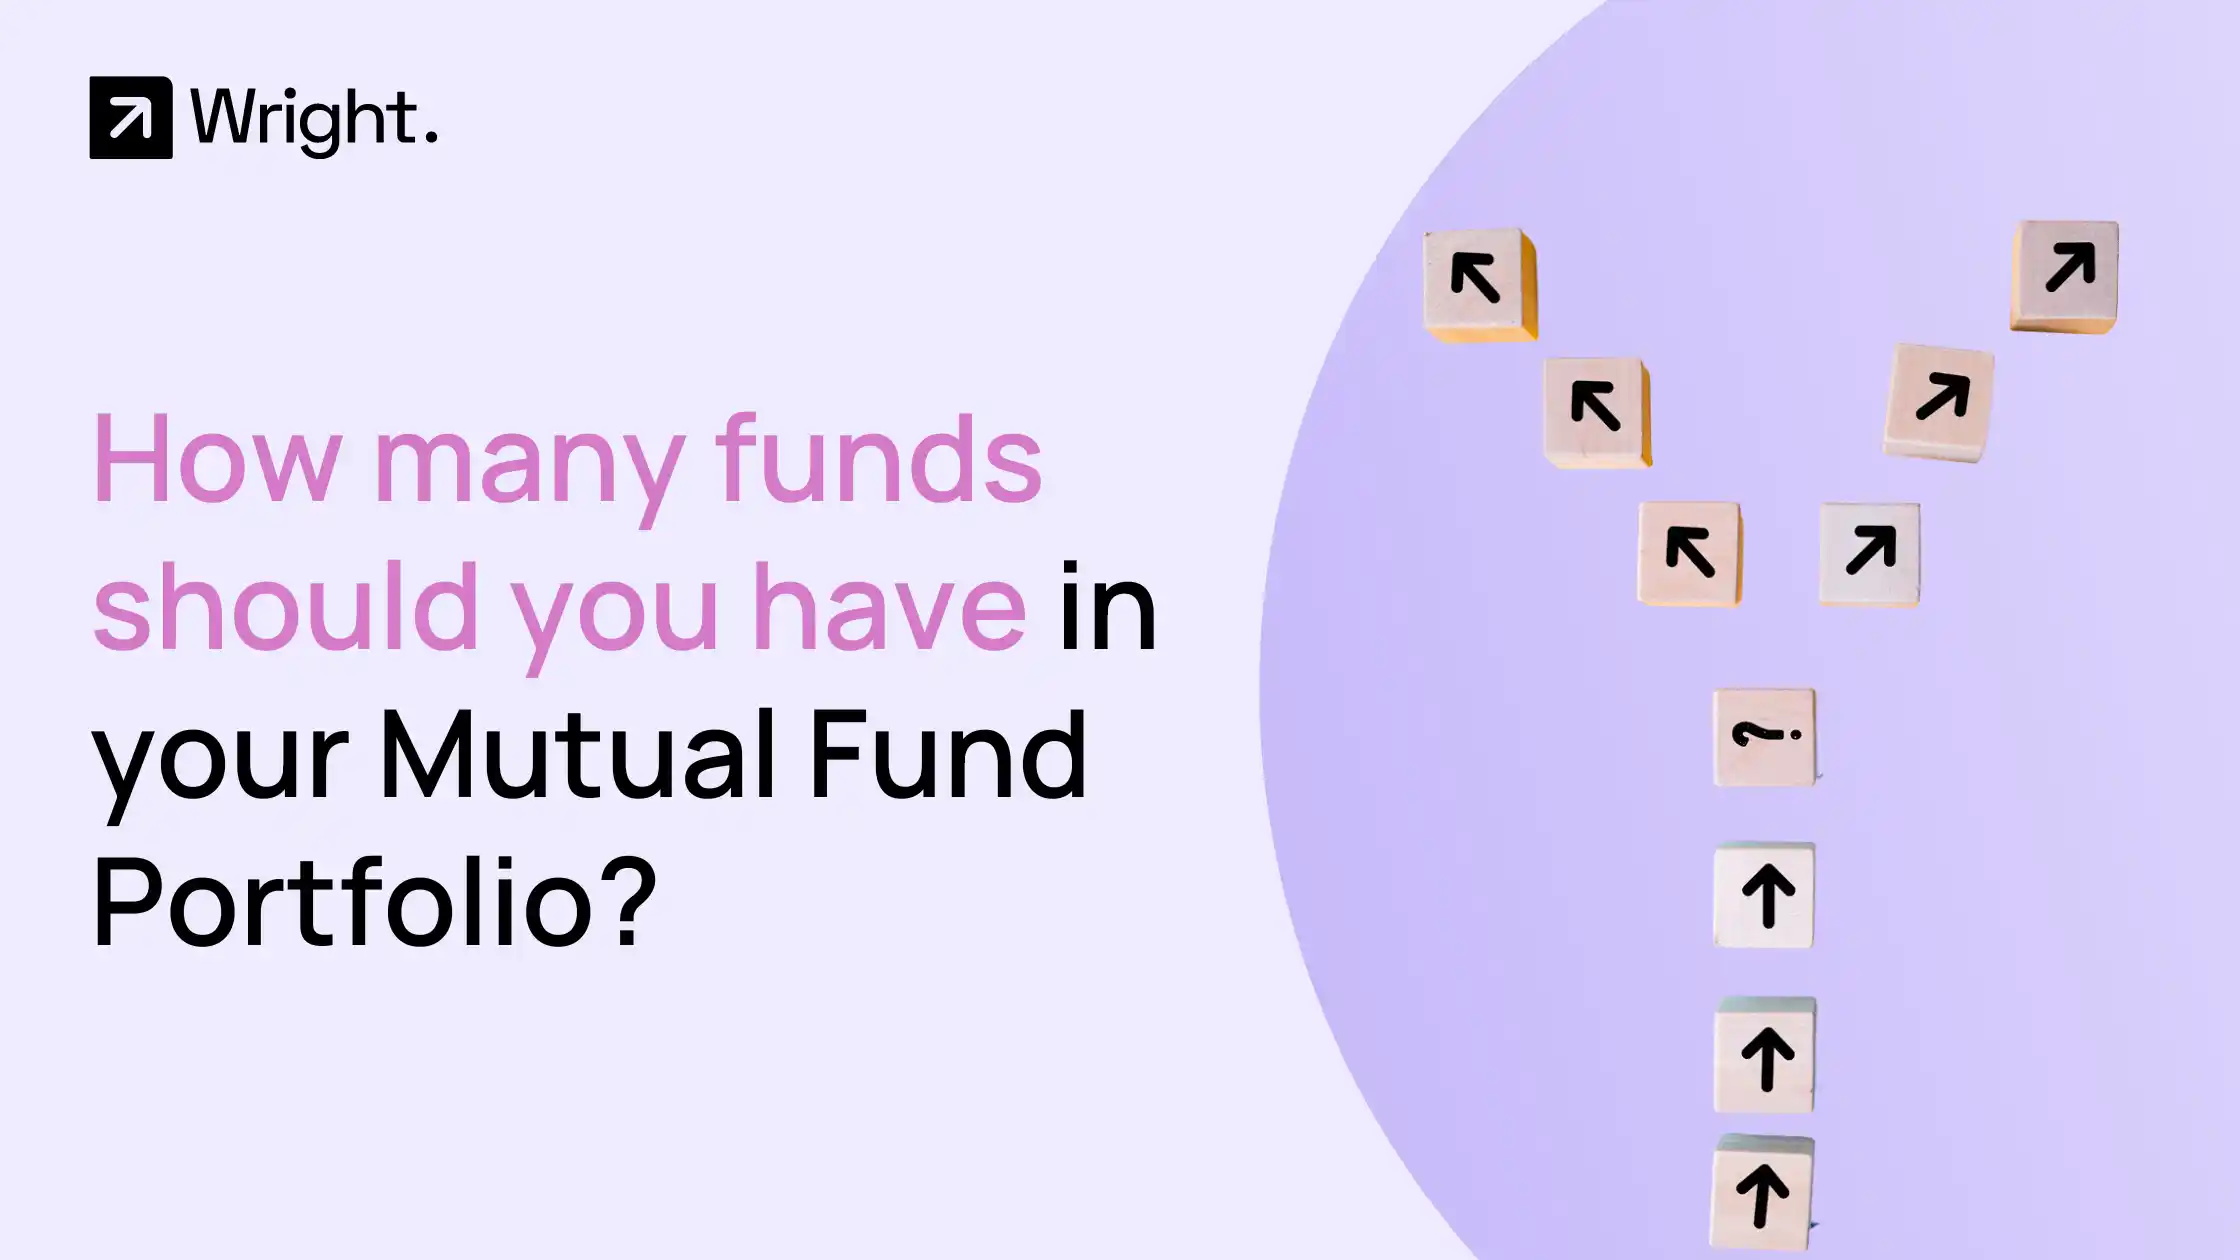 How many funds should you have in your Mutual Fund Portfolio?